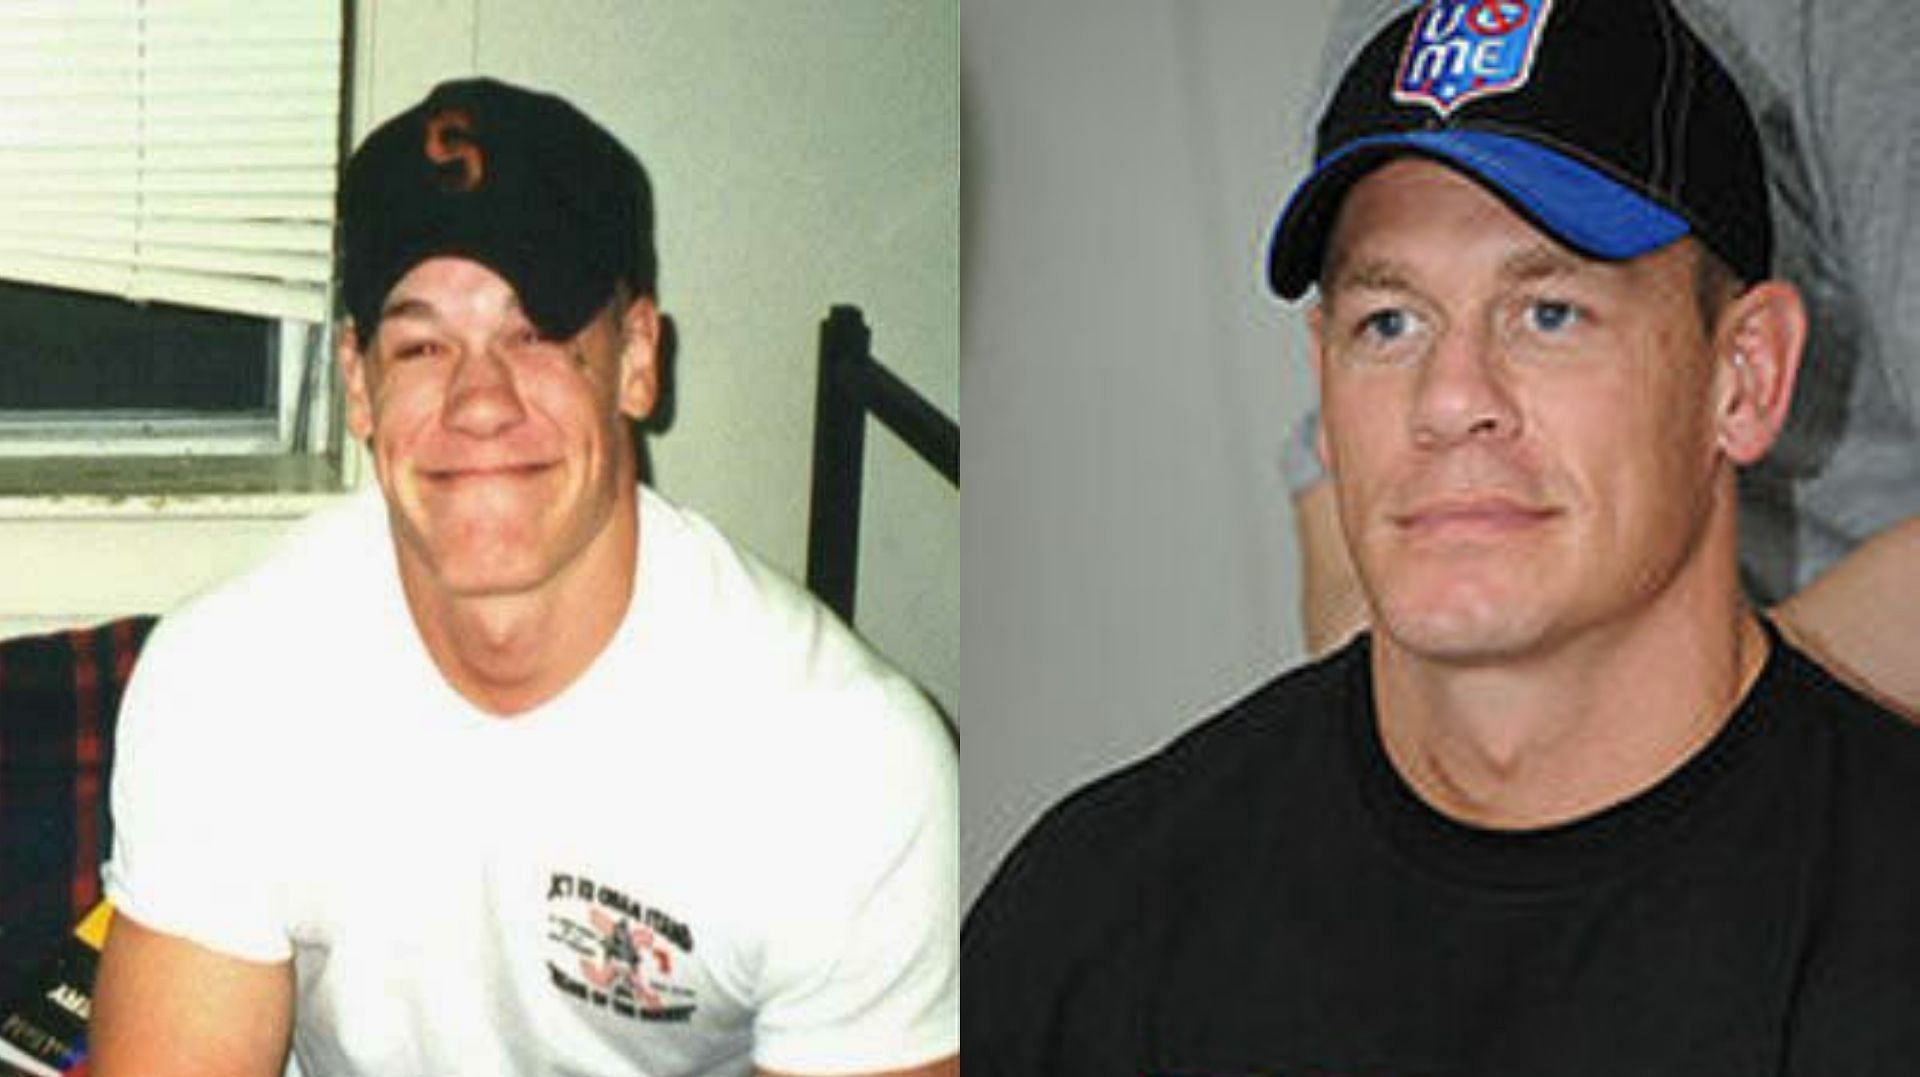 John Cena worked as a limo driver at the age of 19.